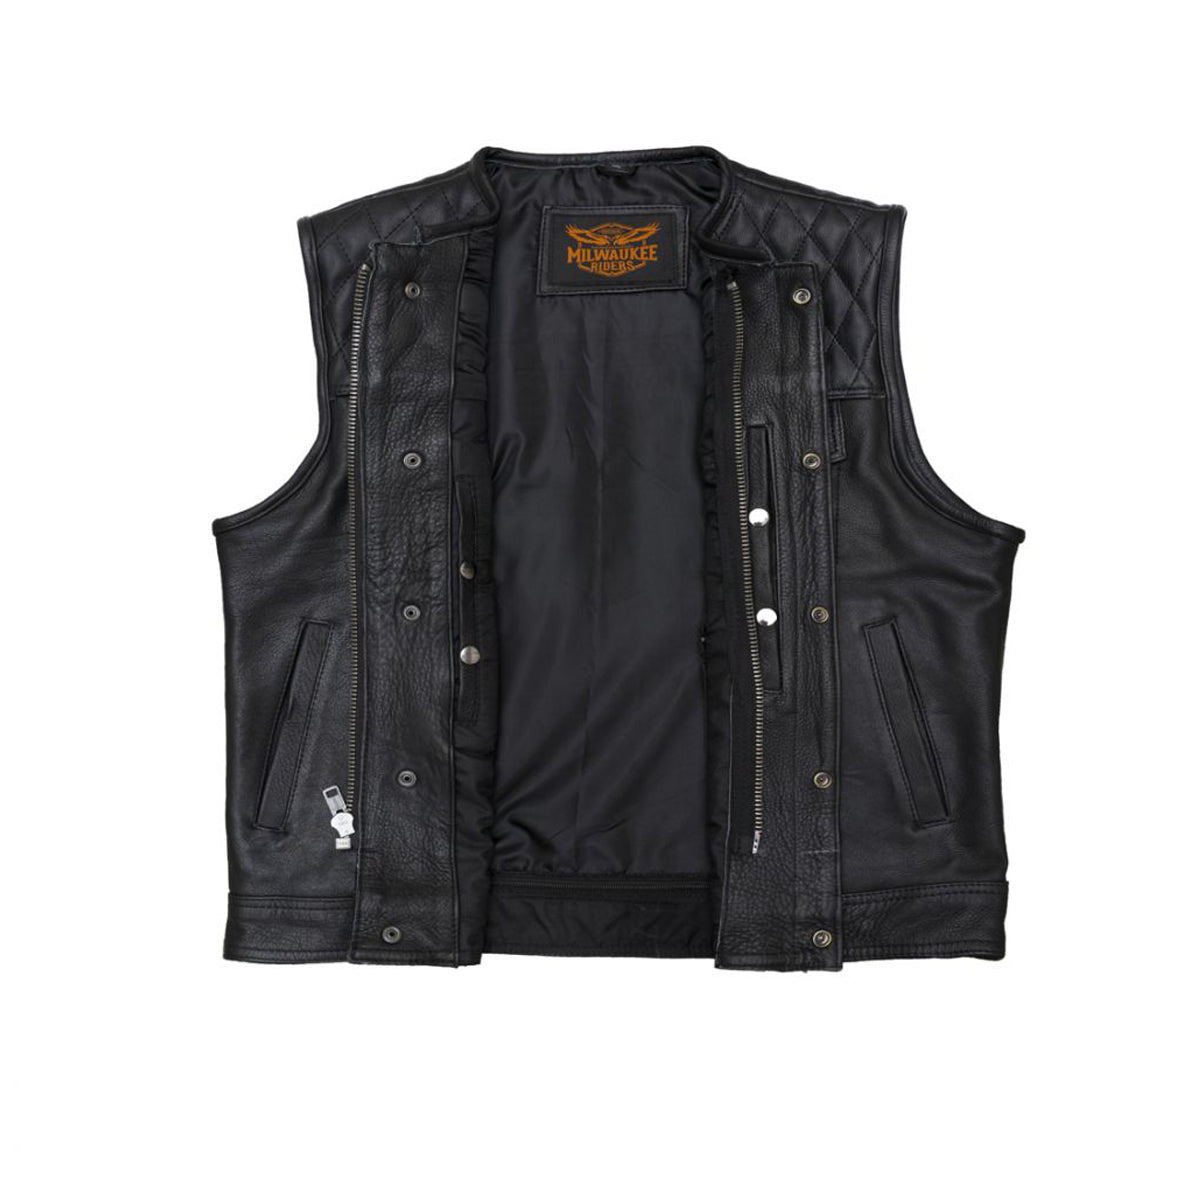 Men's Zippered 1/2" Collar Motorcycle Club Vest with Diamond Padding on Shoulder